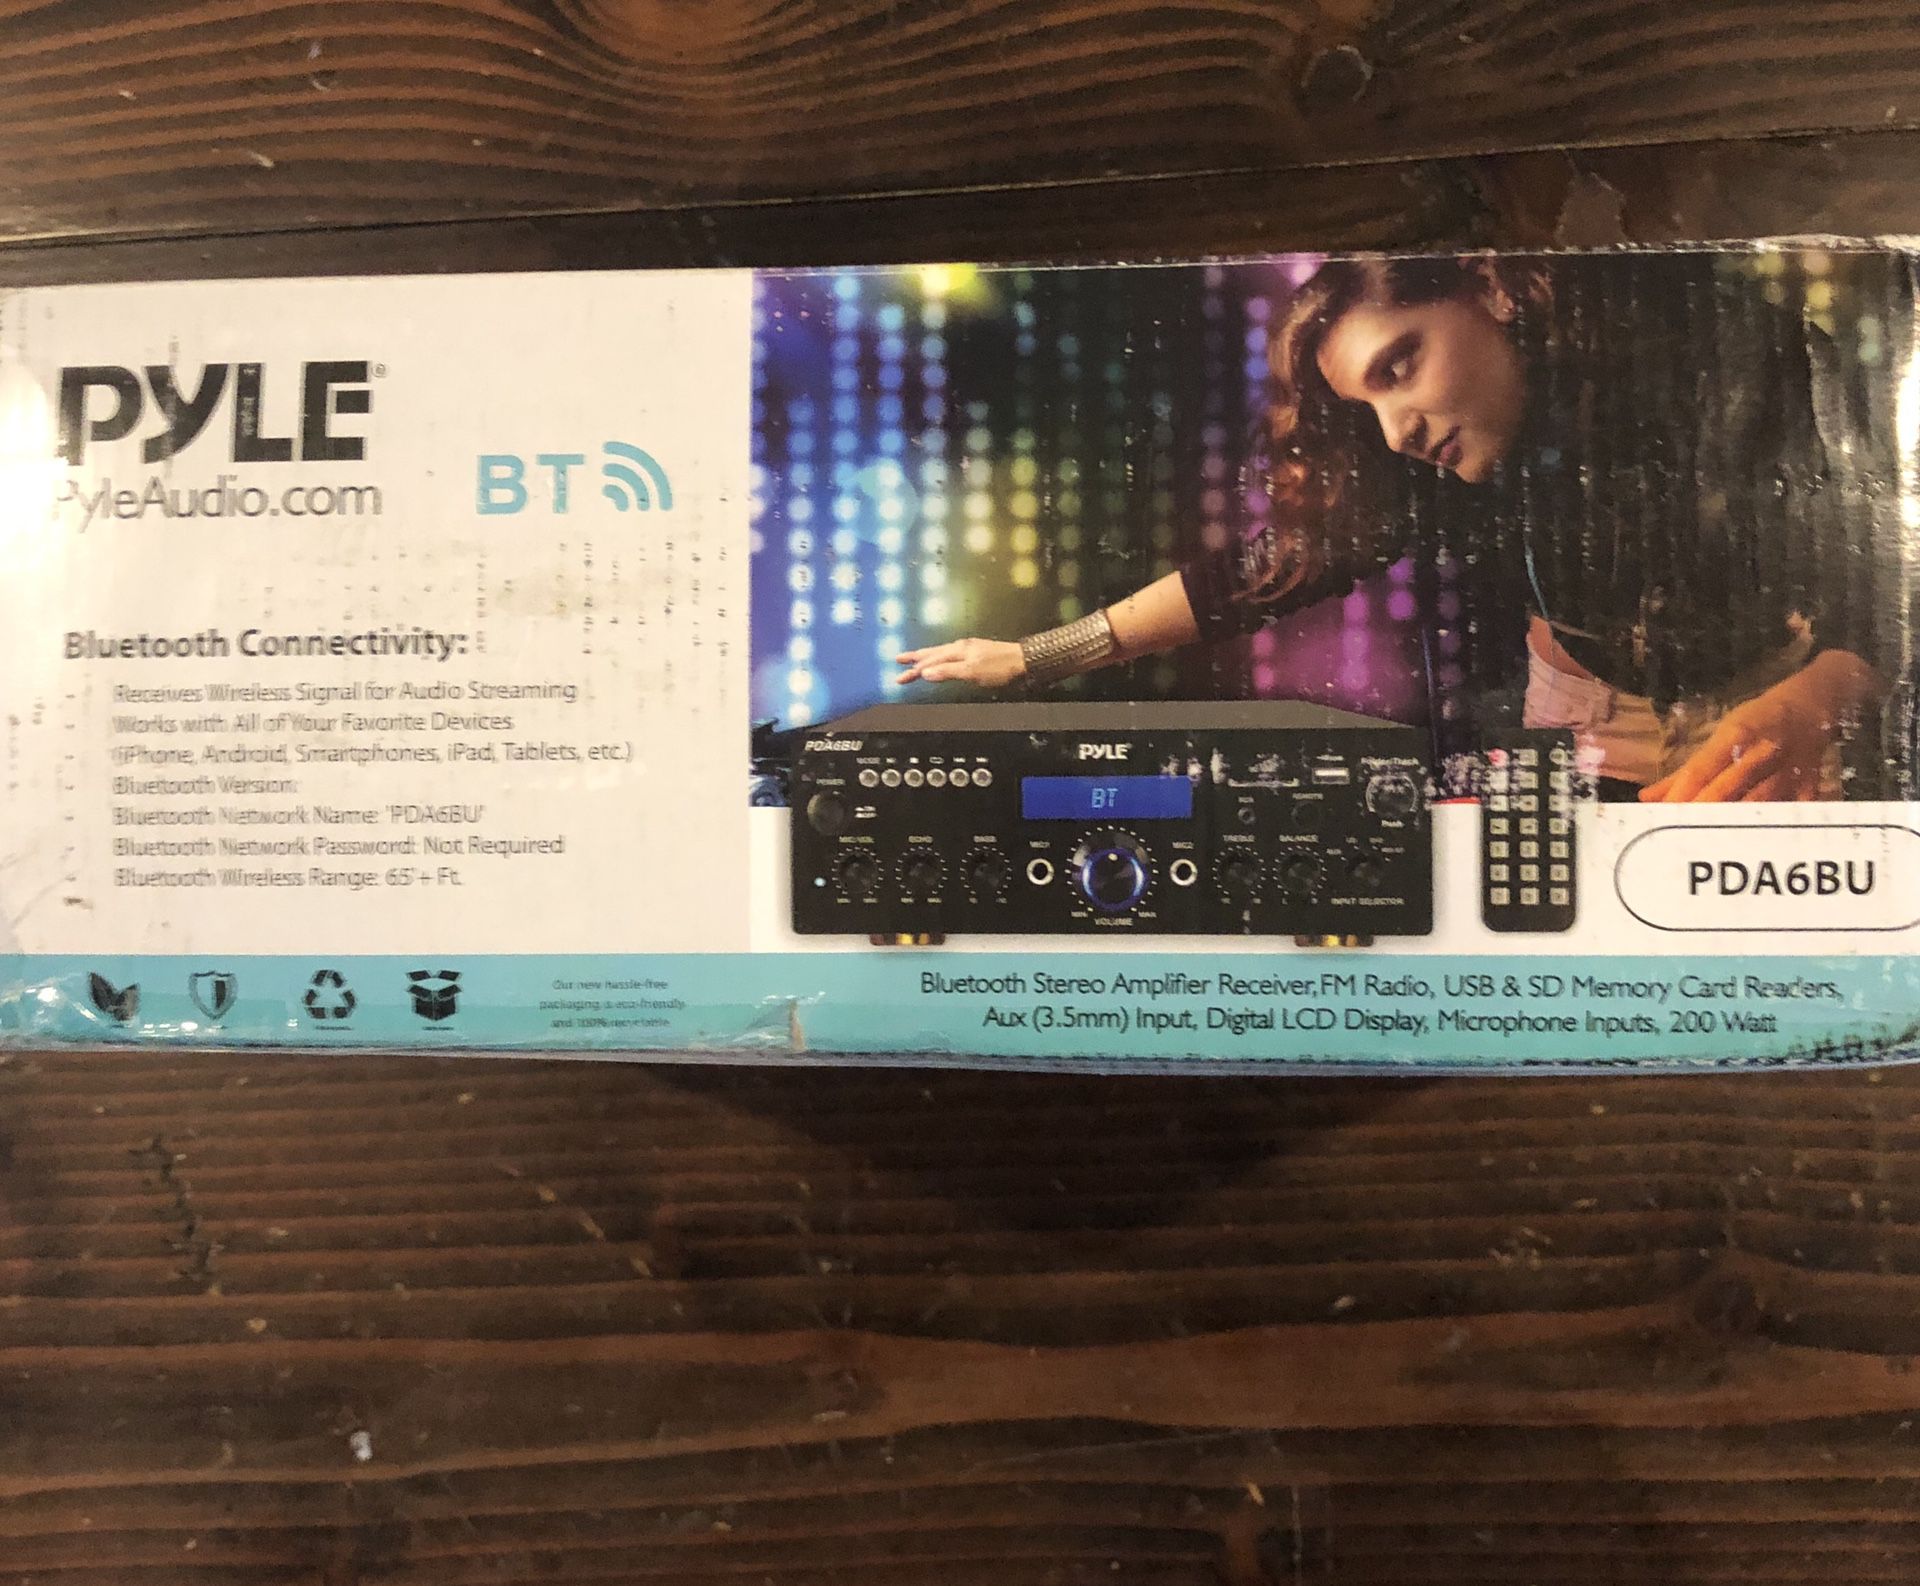 Pyle 200W Bluetooth LCD Home Stereo Amplifier Receiver with Remote & FM Antenna.